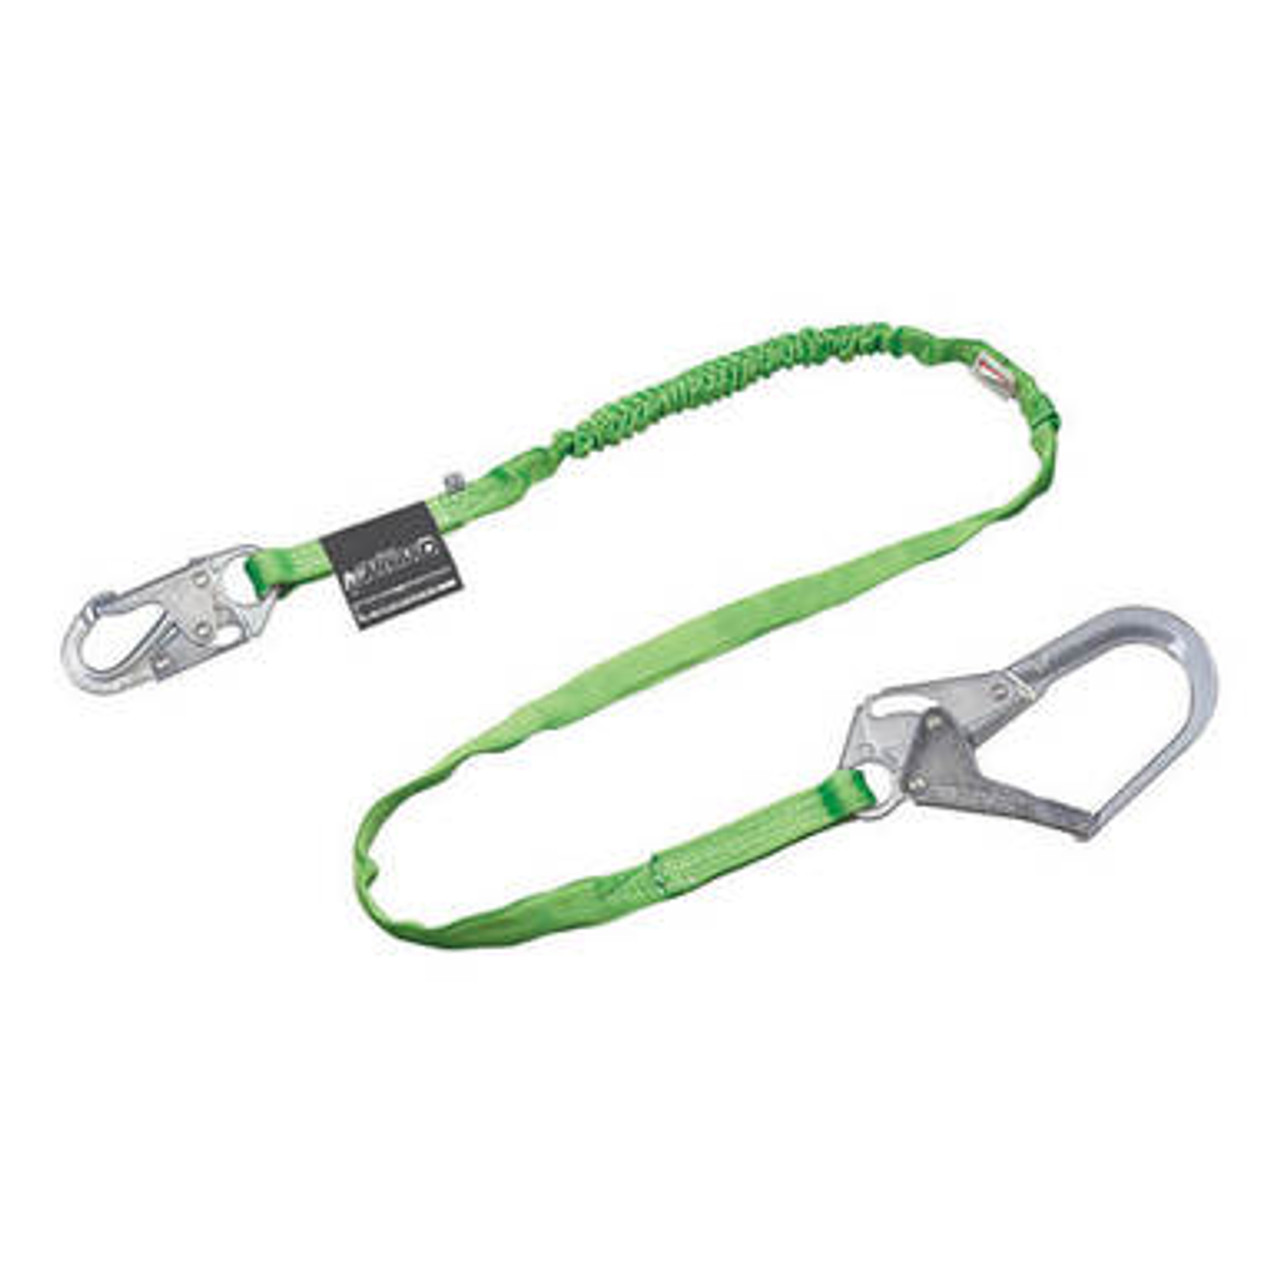 Shock Absorbing Lanyard - SP - Twin Leg - 100% Tie Off PVC Coated Cable -  Snap & Form Hooks - 110 - 220 Lb Capacity - Safety Supplies Canada